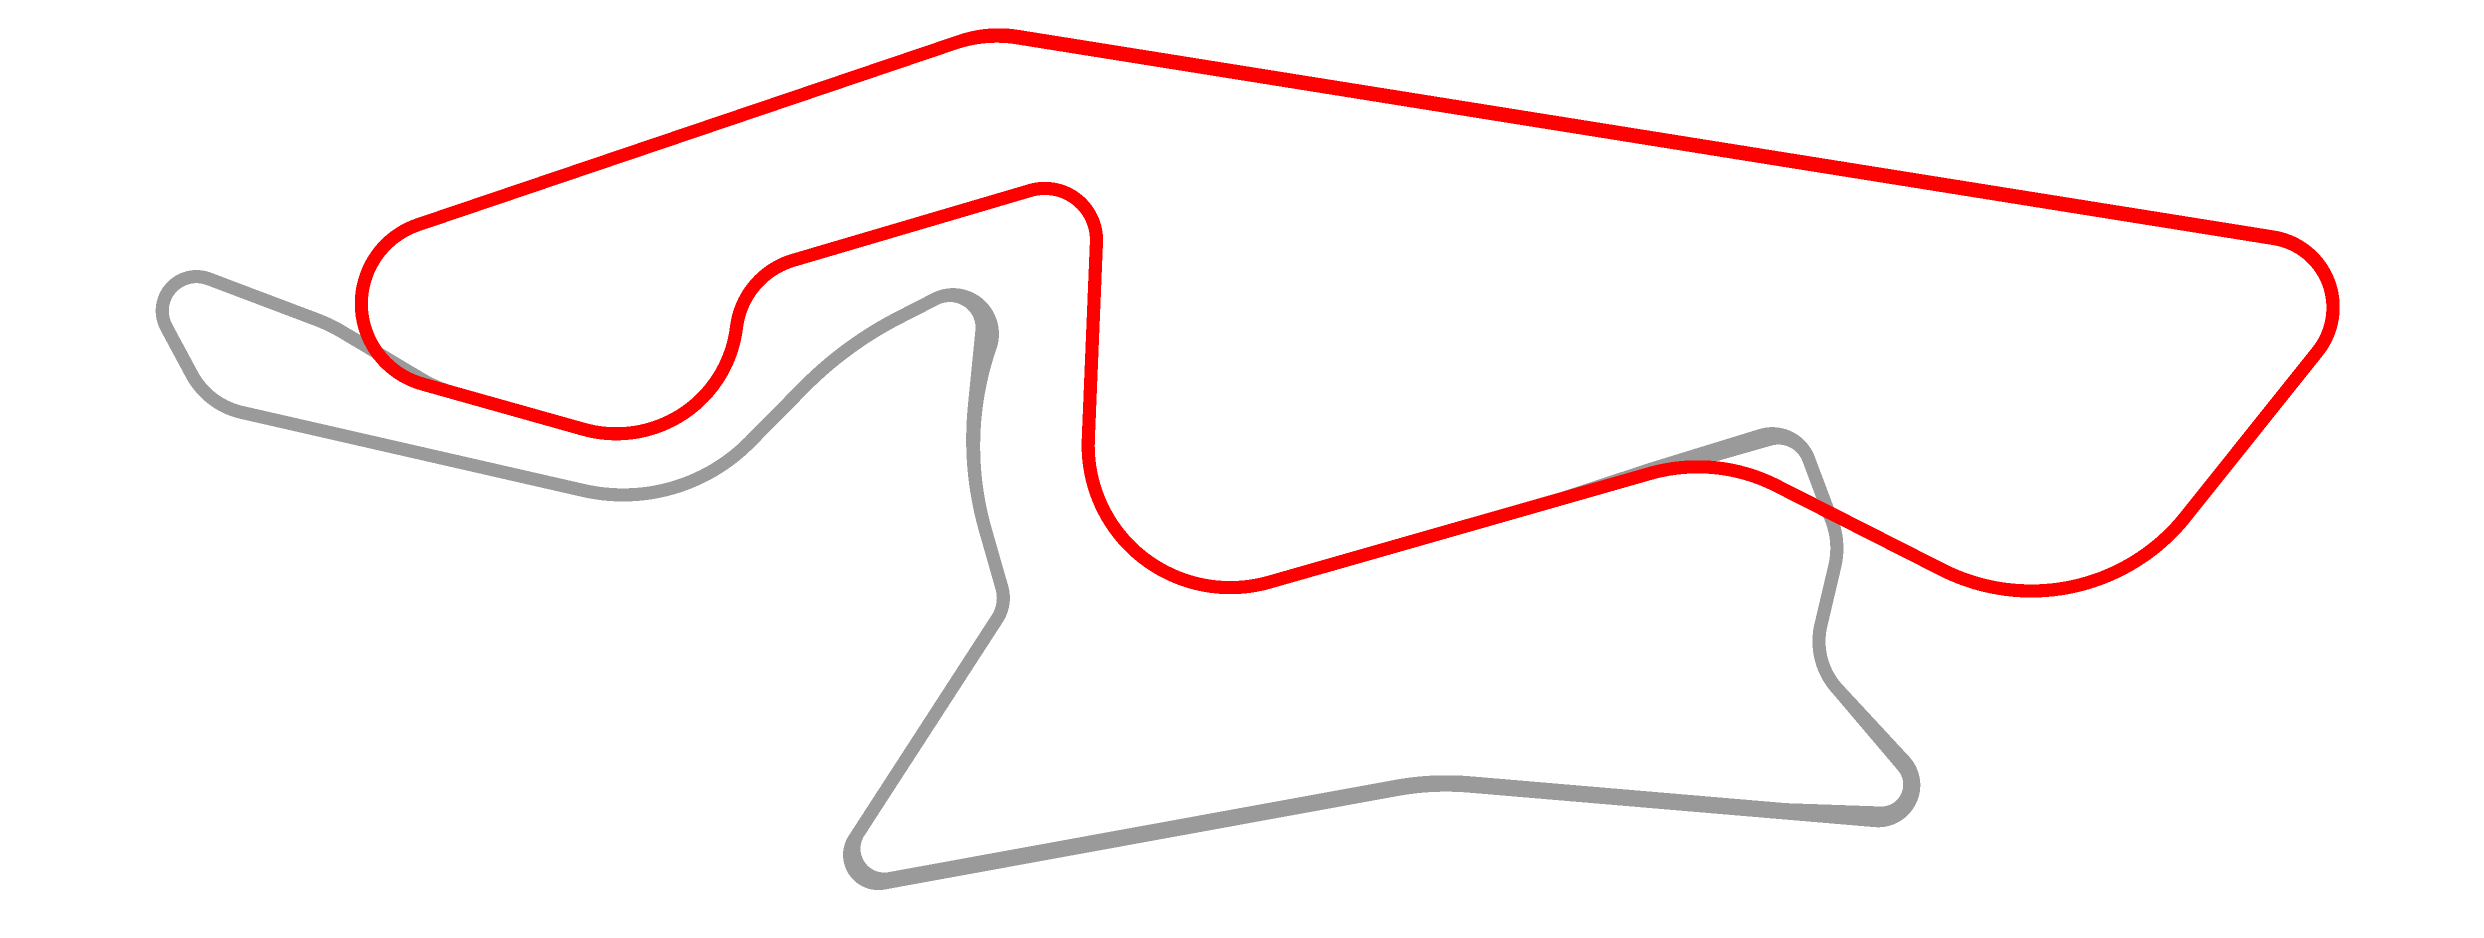 Kyalami Layout 3 Mei 2020 Red Old.png